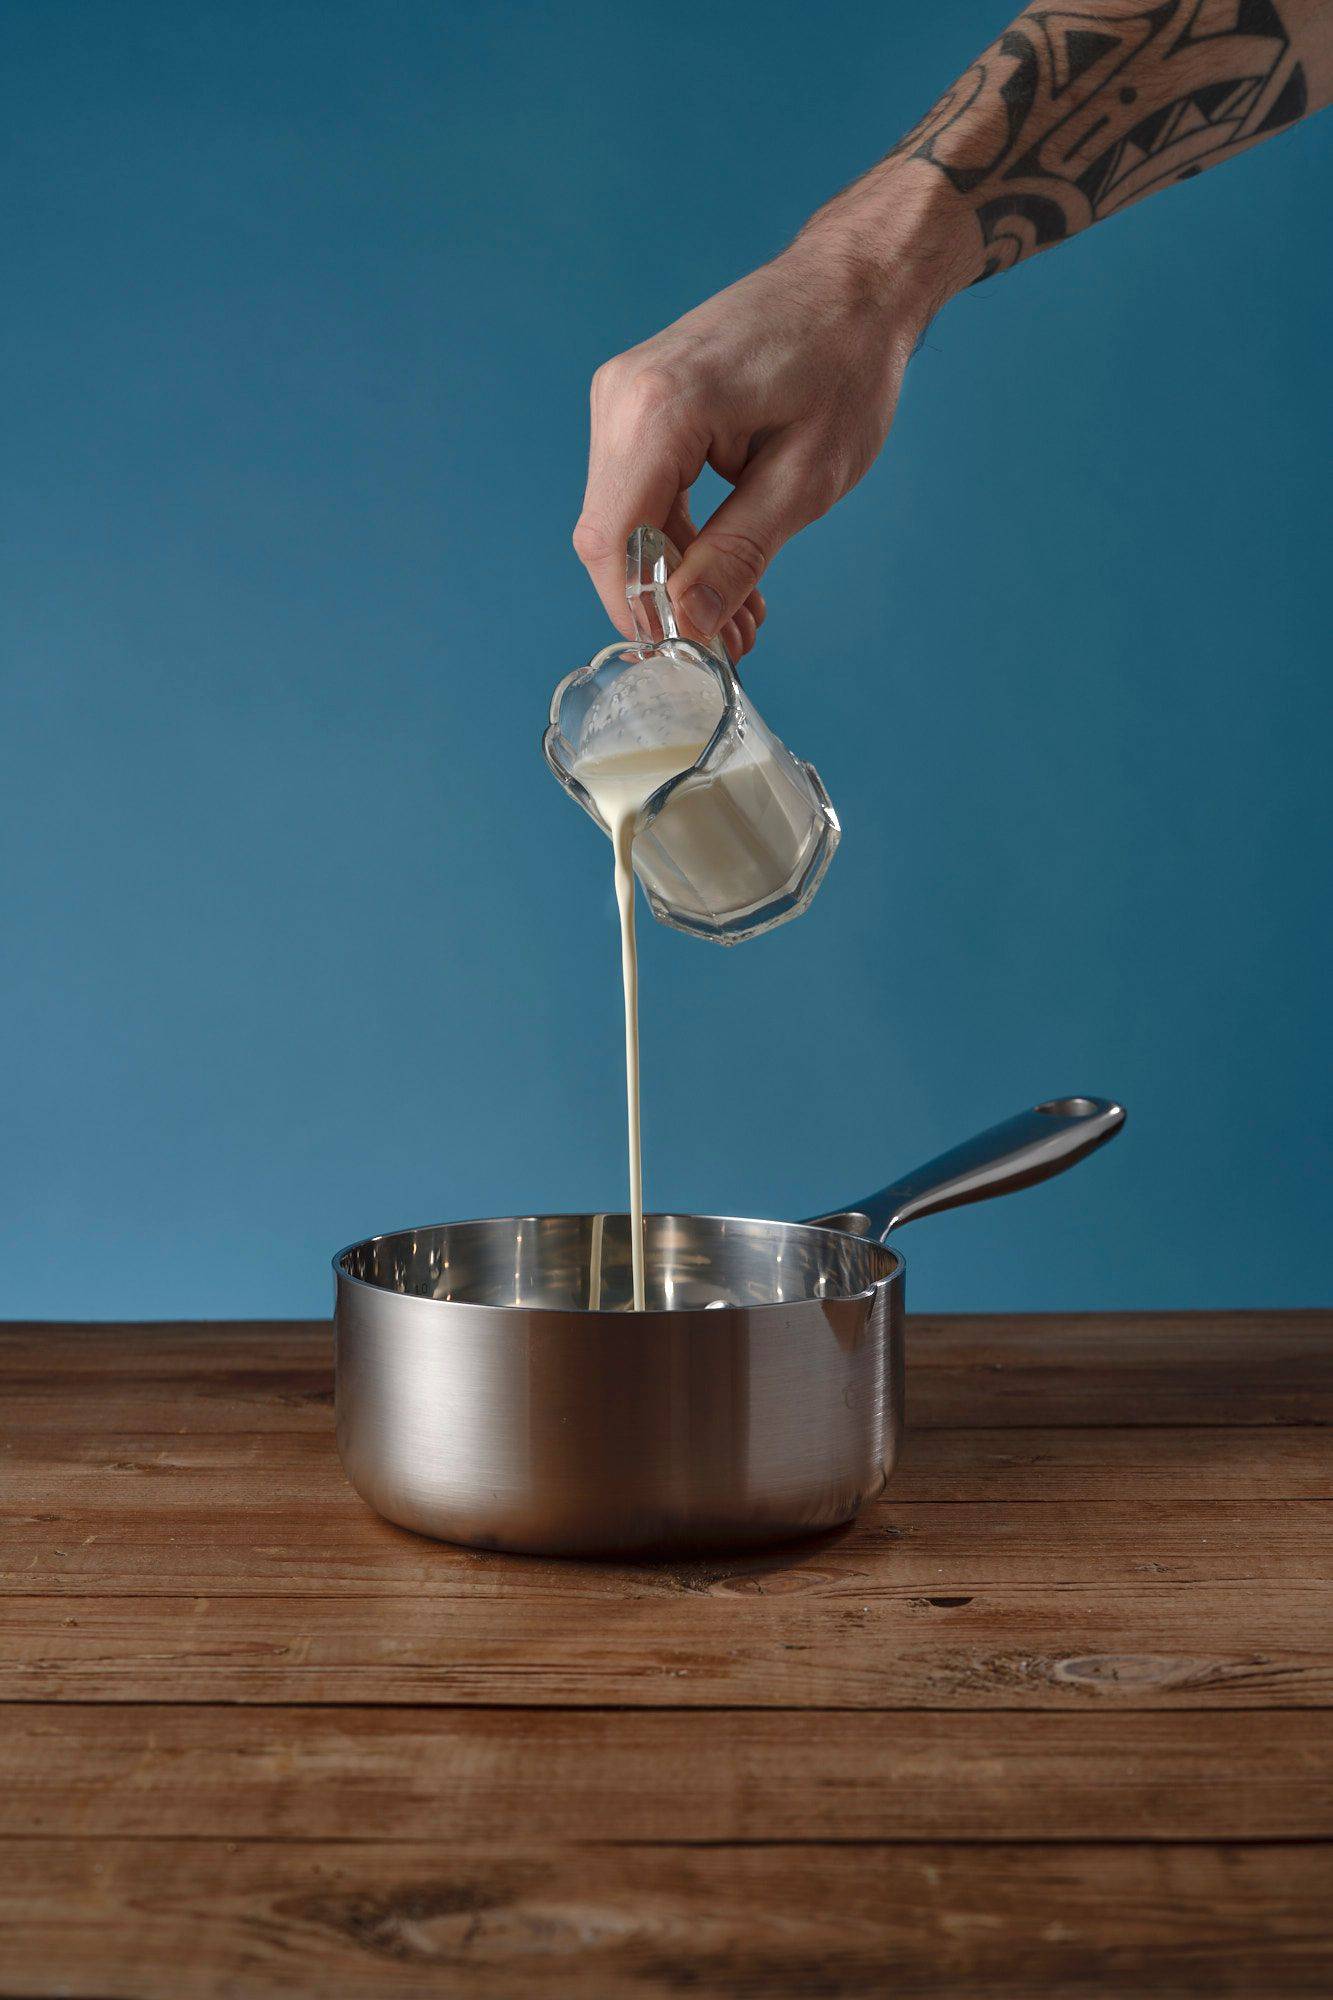 hand pouring cream into metal sauce pan on a wooden table with blue background